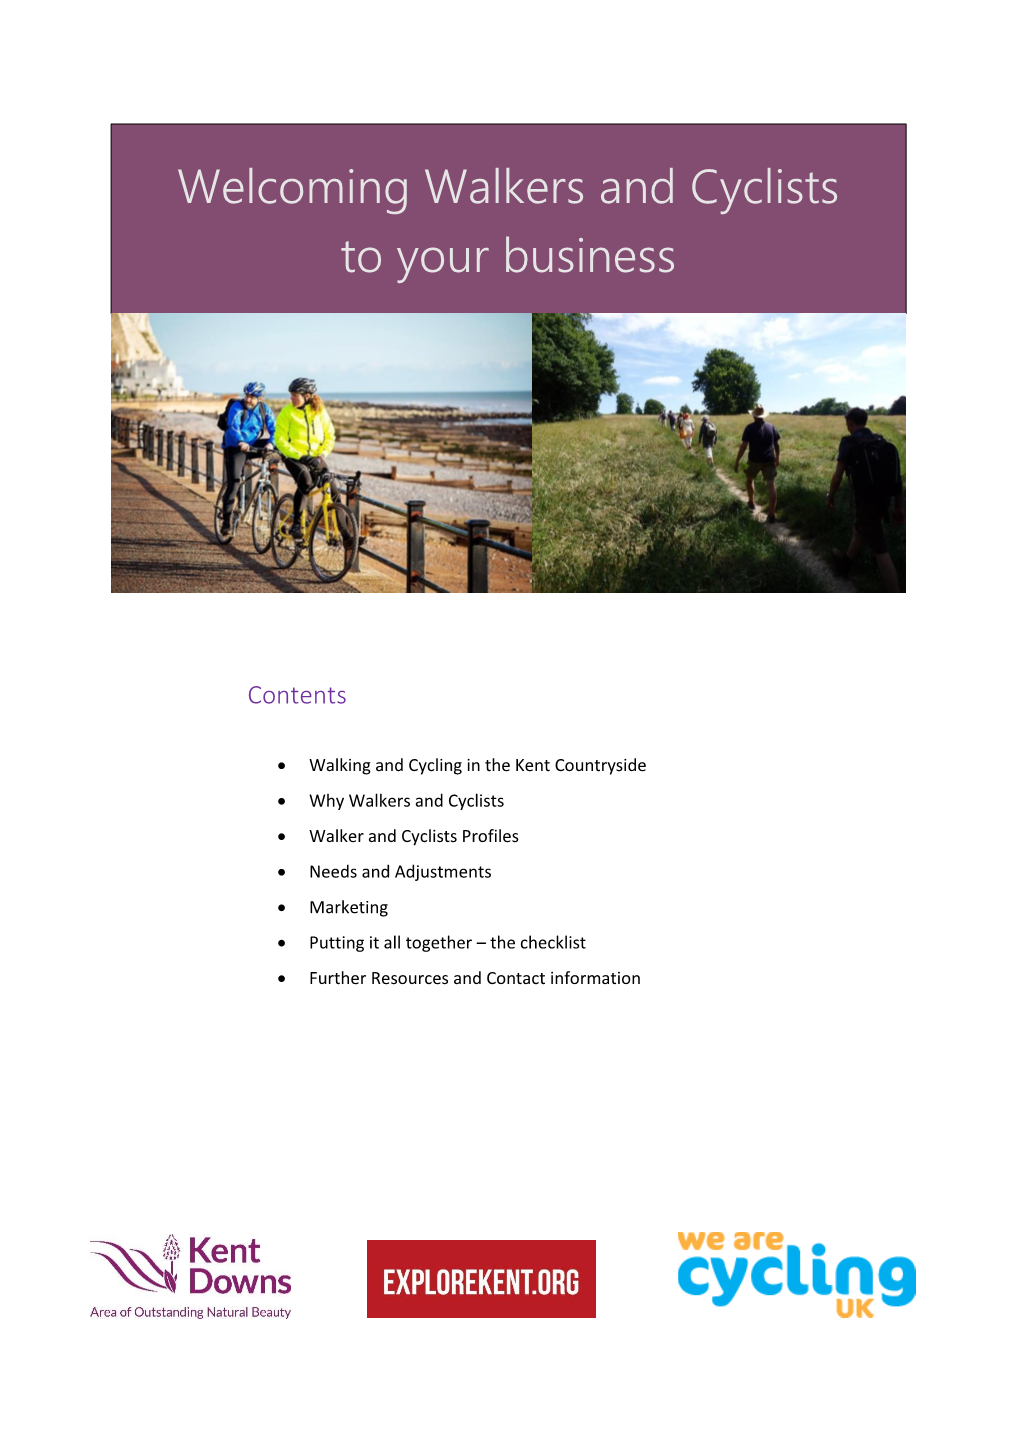 Welcoming Walkers and Cyclists to Your Business